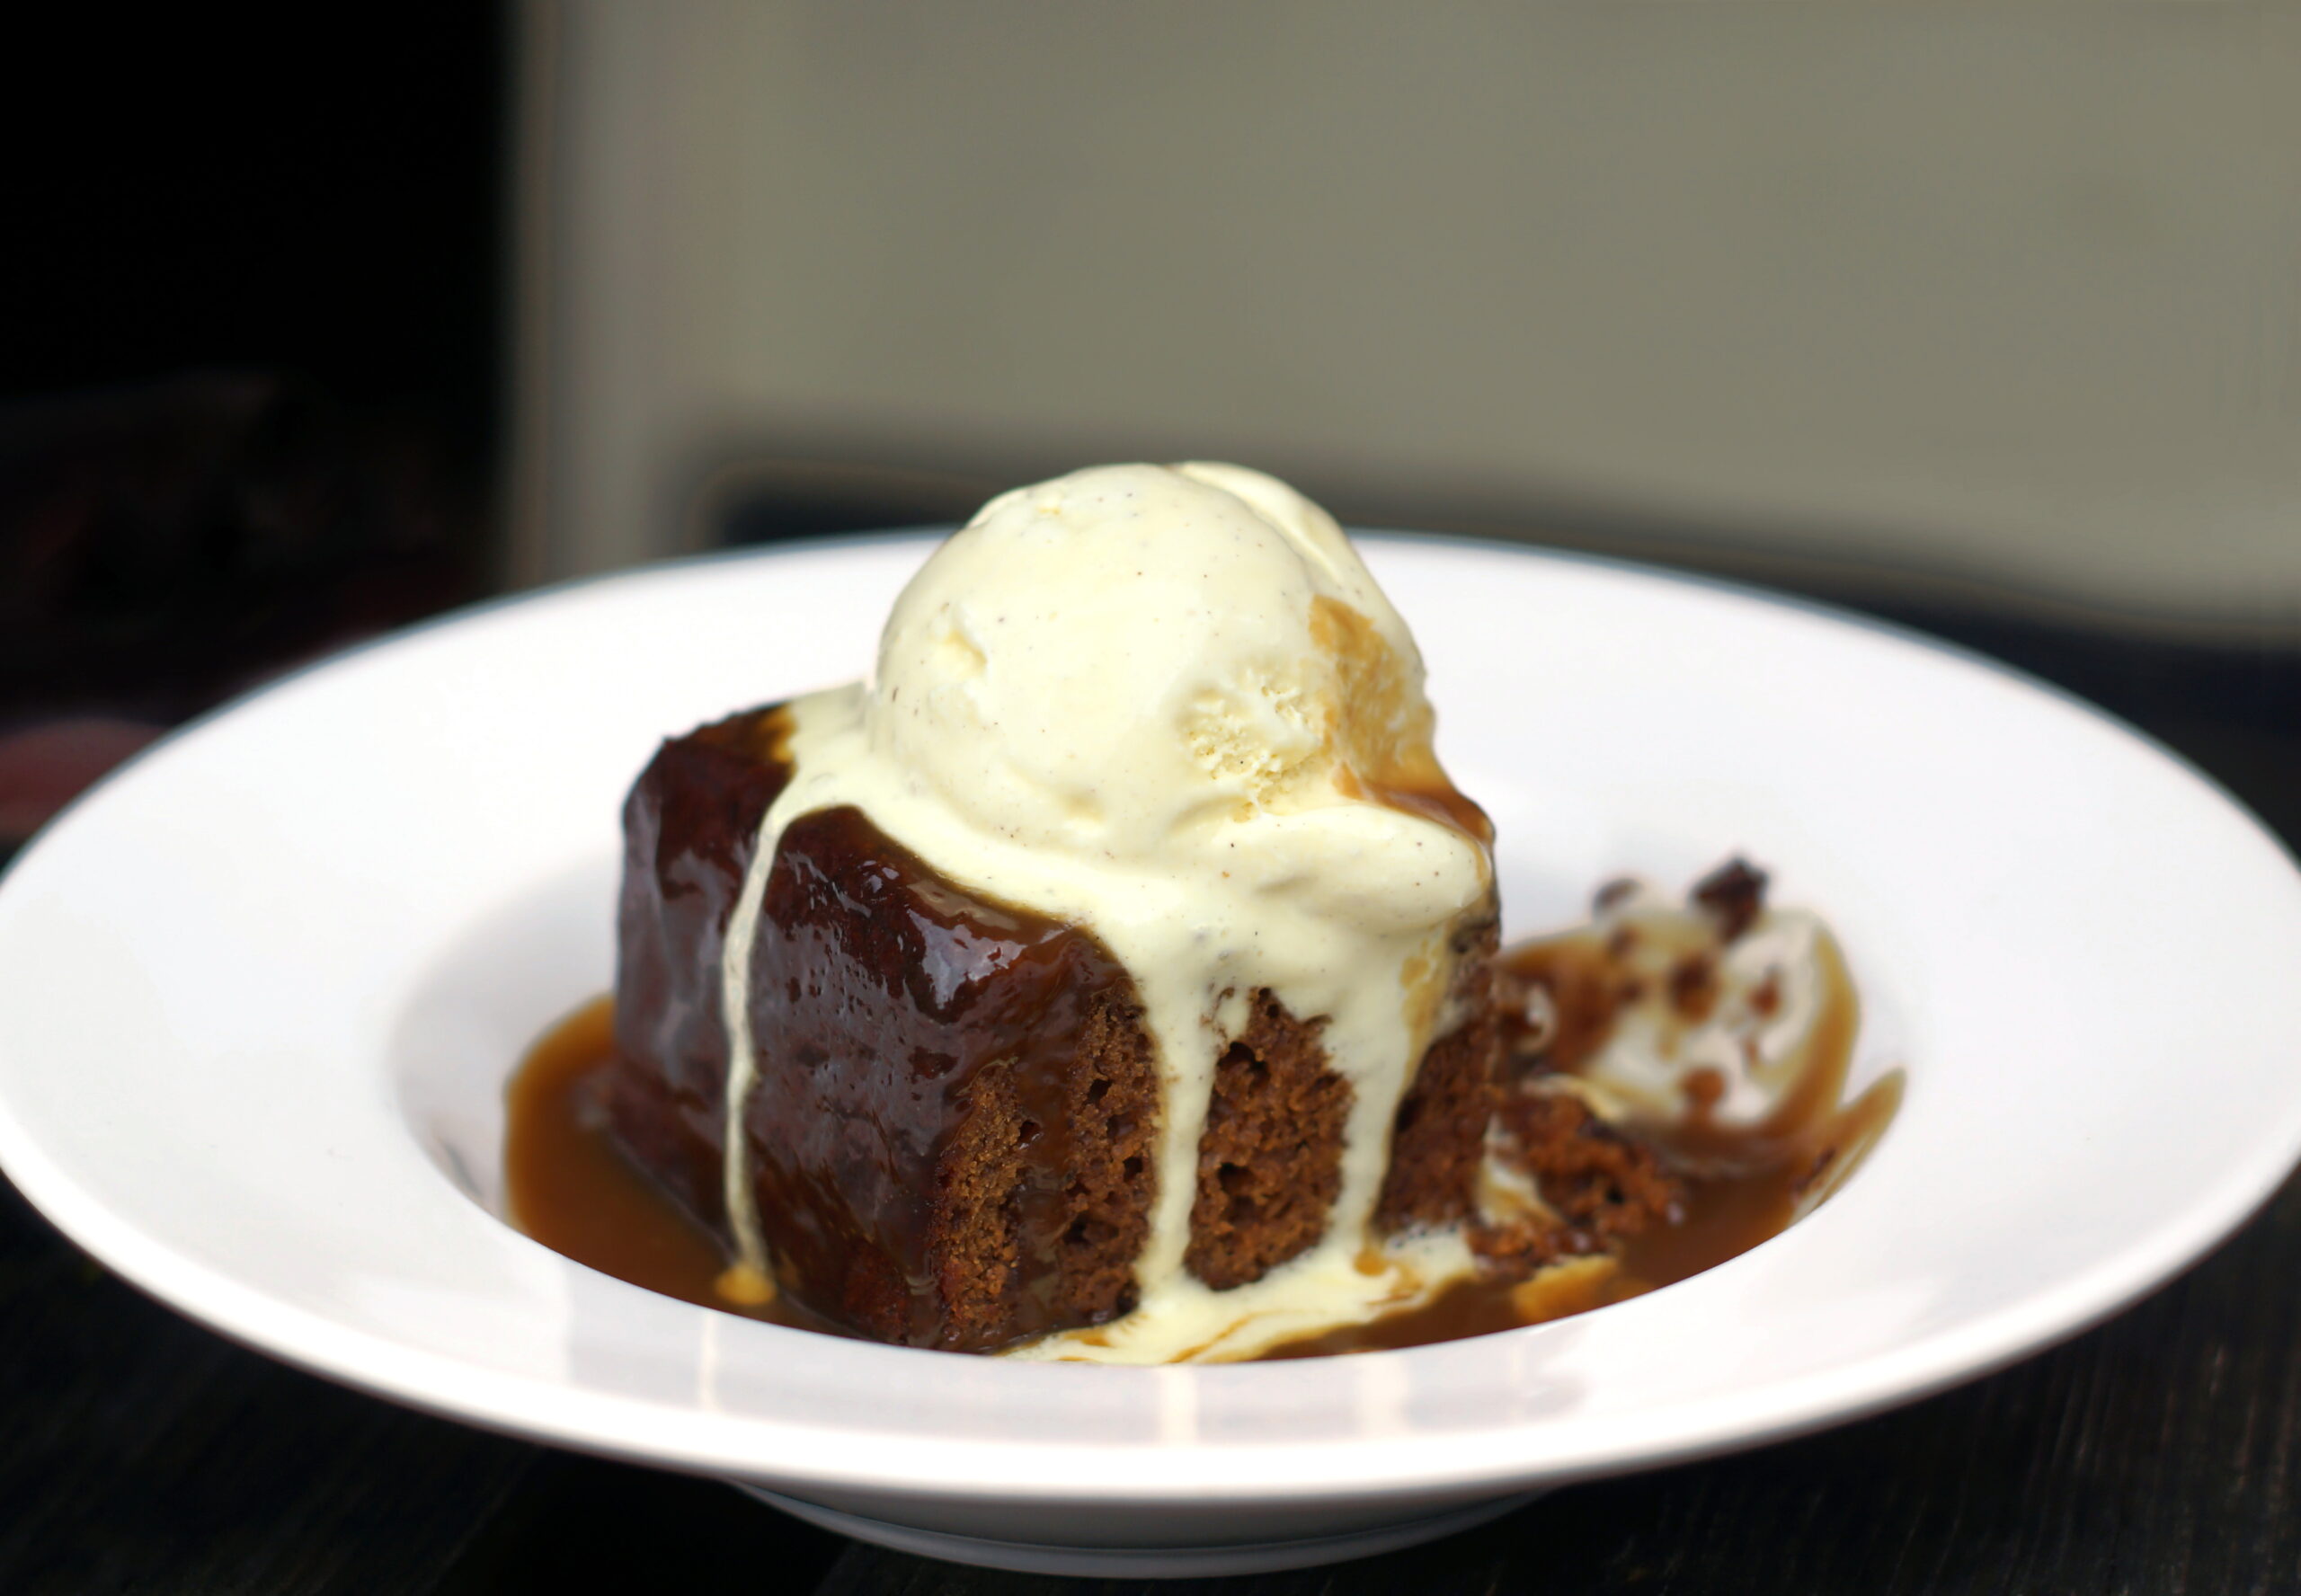 Sticky toffee pudding with ice cream drizzled on top.